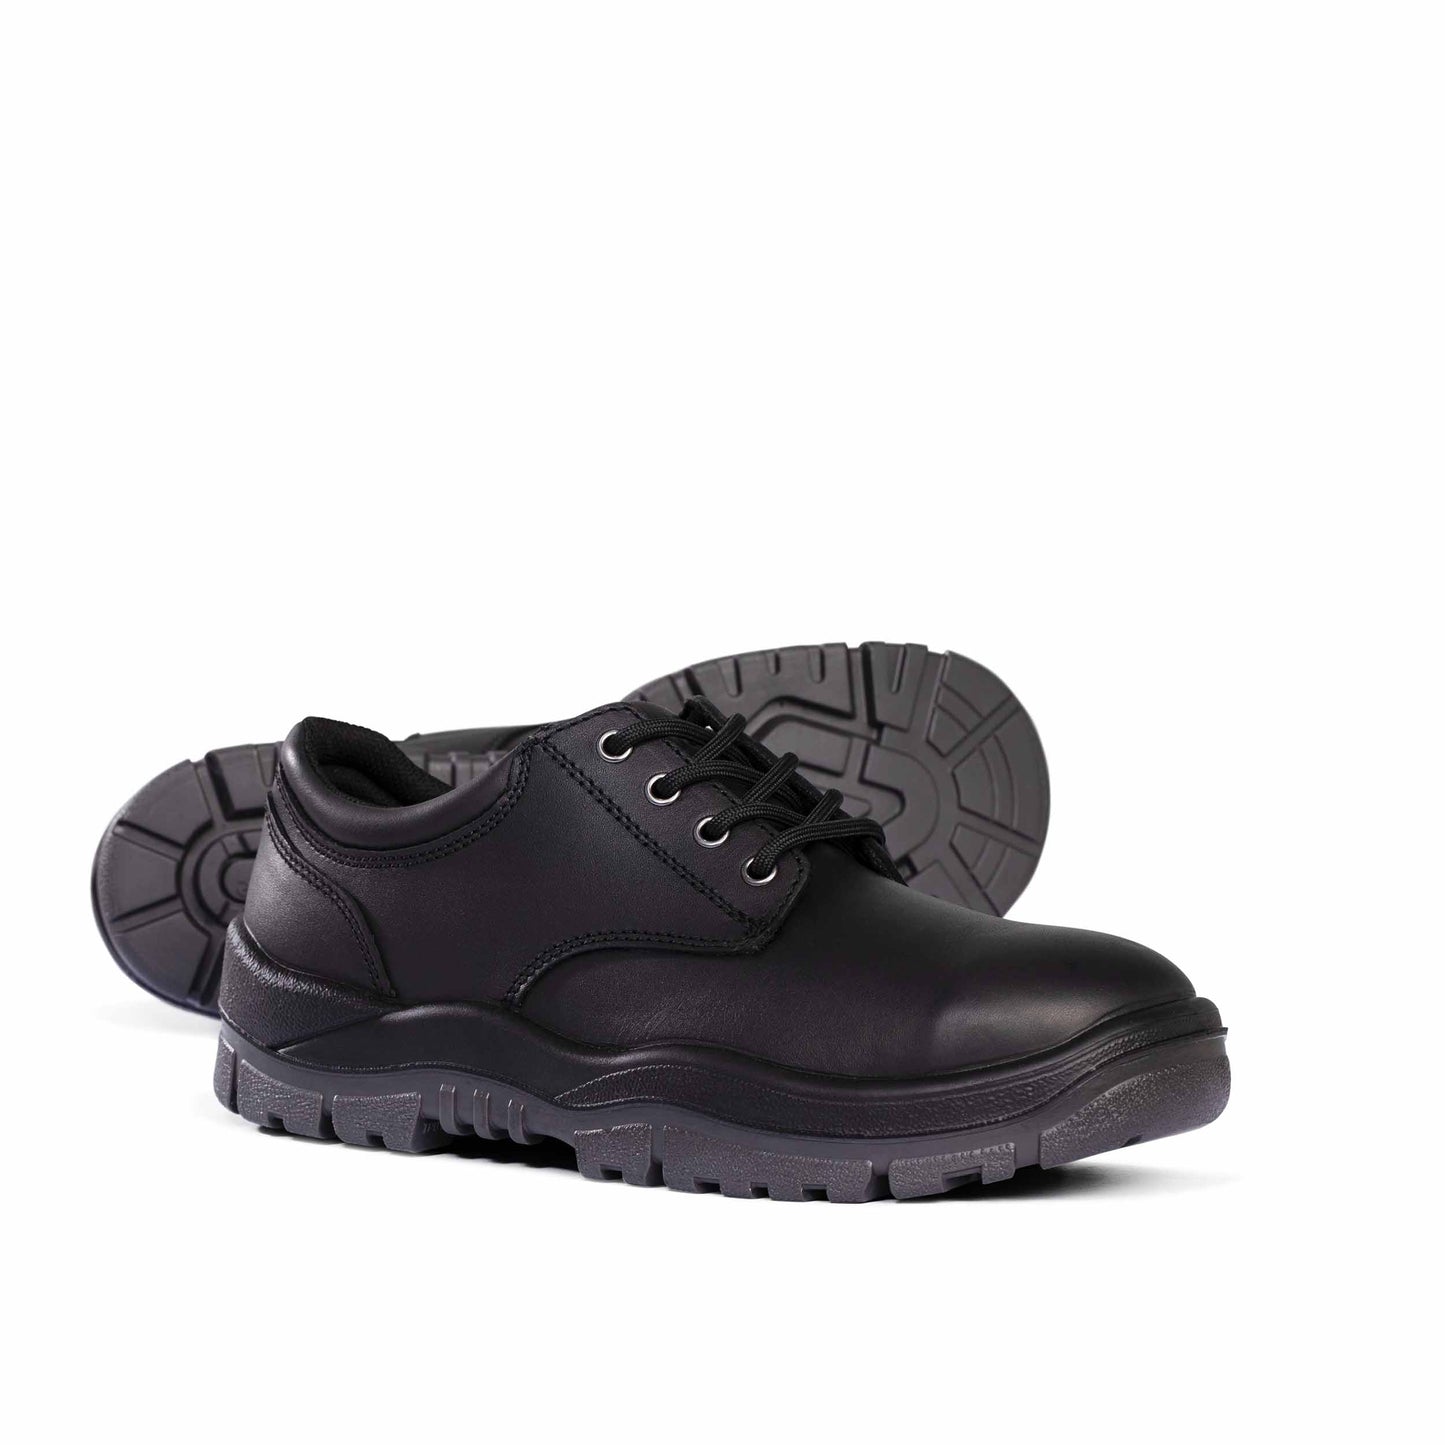 MONGREL 910025 WORK SHOES - LACE UP